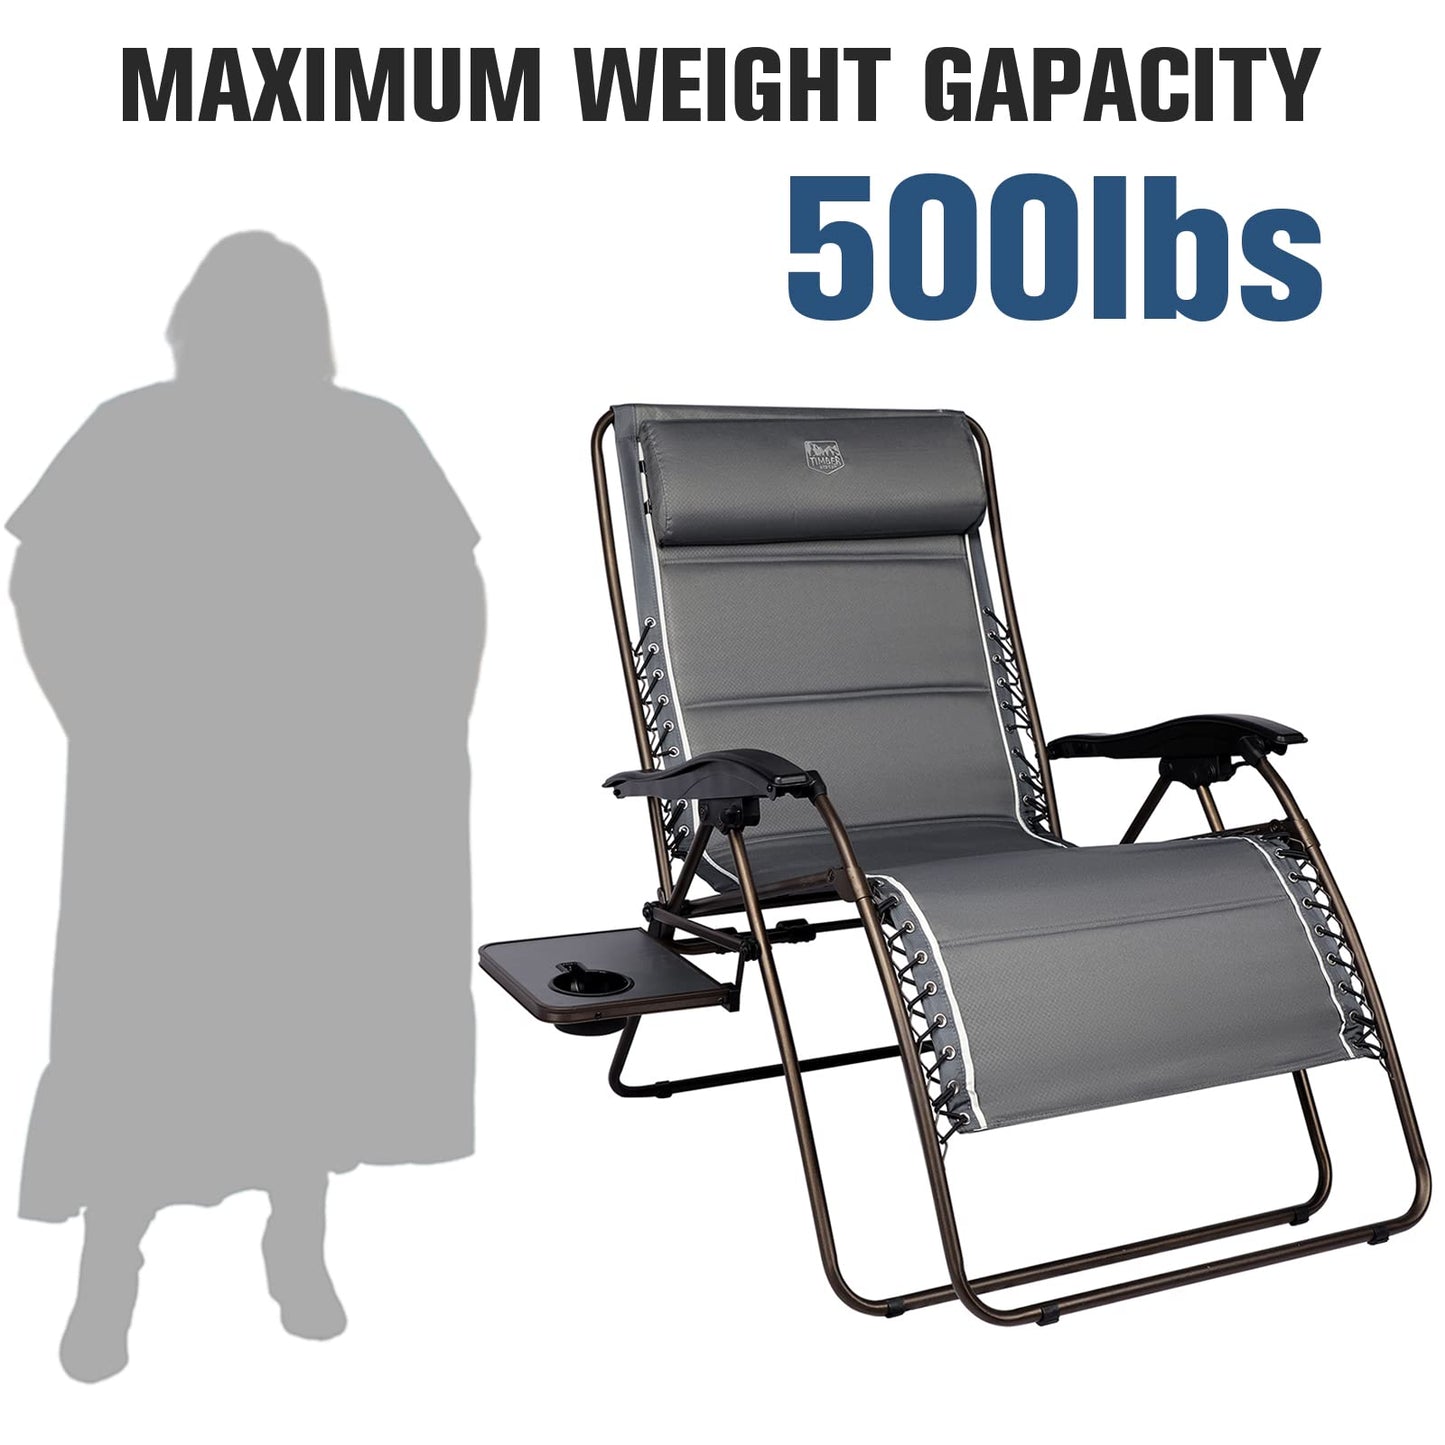 TIMBER RIDGE XXL Oversized Zero Gravity Chair, Full Padded Patio Lounger with Side Table, 33”Wide Reclining Lawn Chair, Support 500lbs(Gray) Grey-new